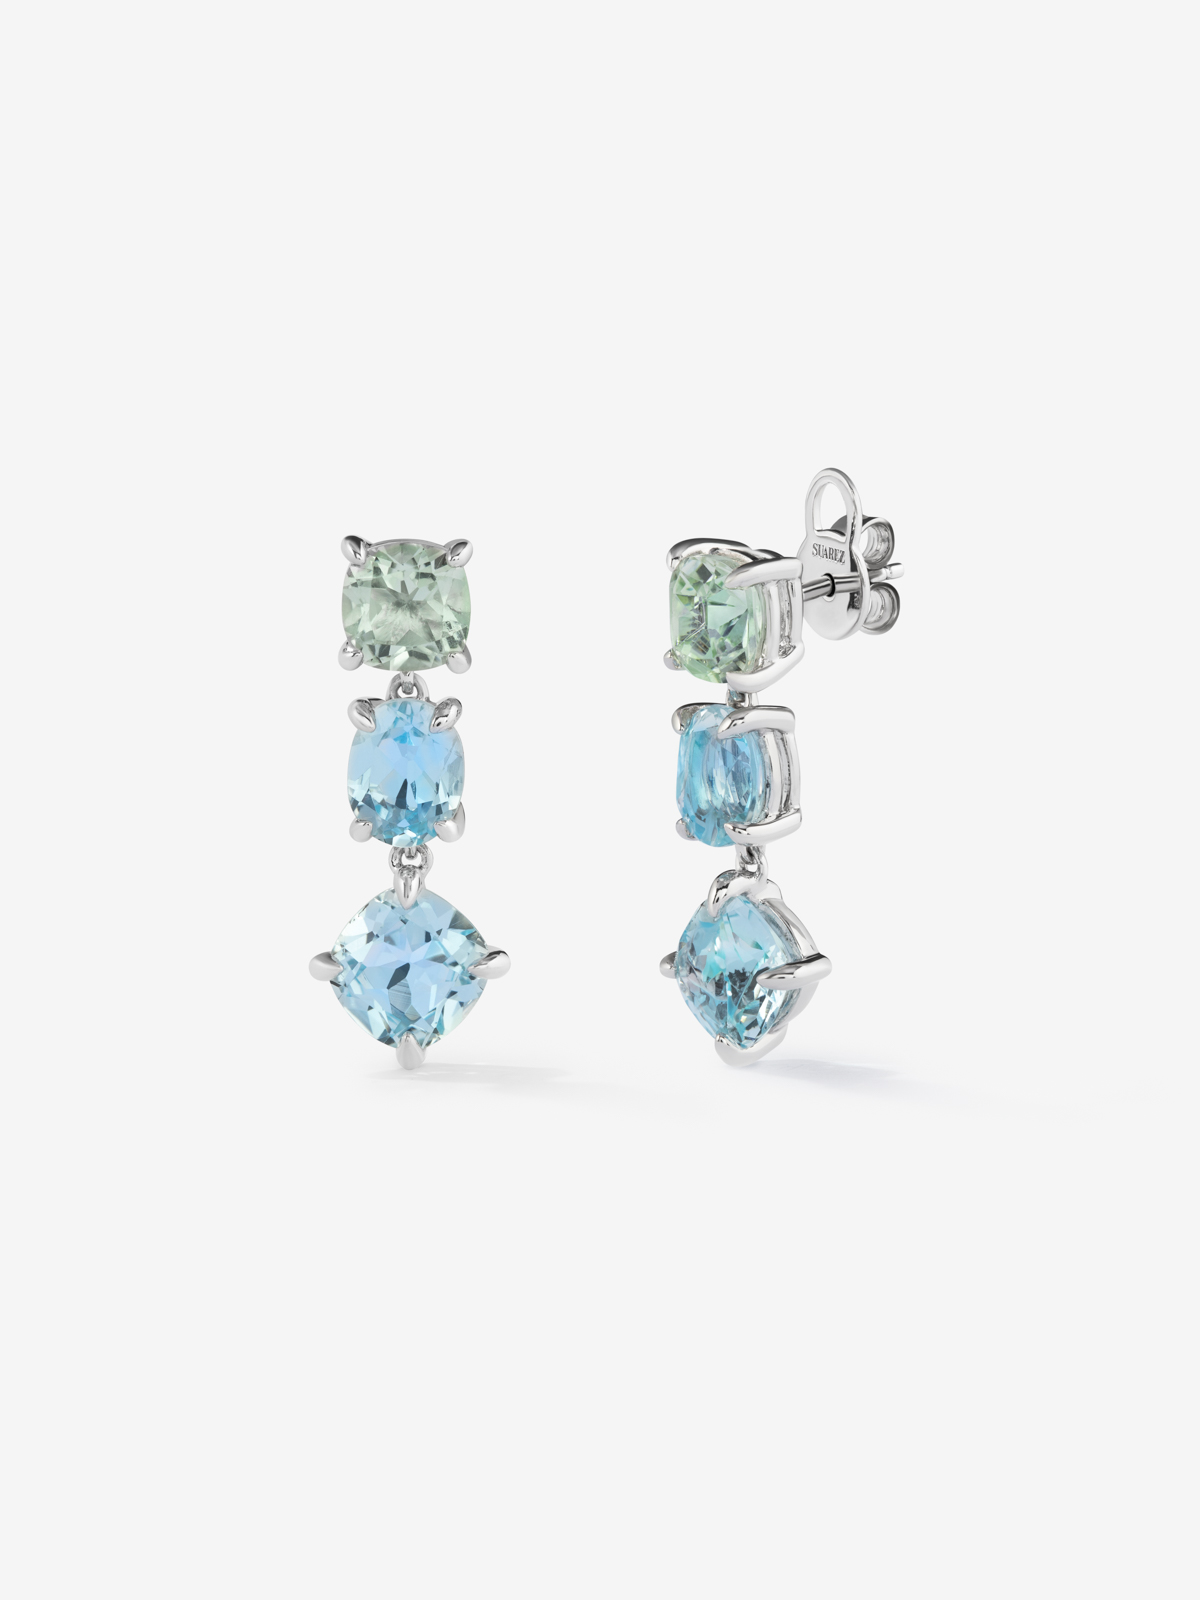 Long 925 silver earrings with green amethyst and topaz.